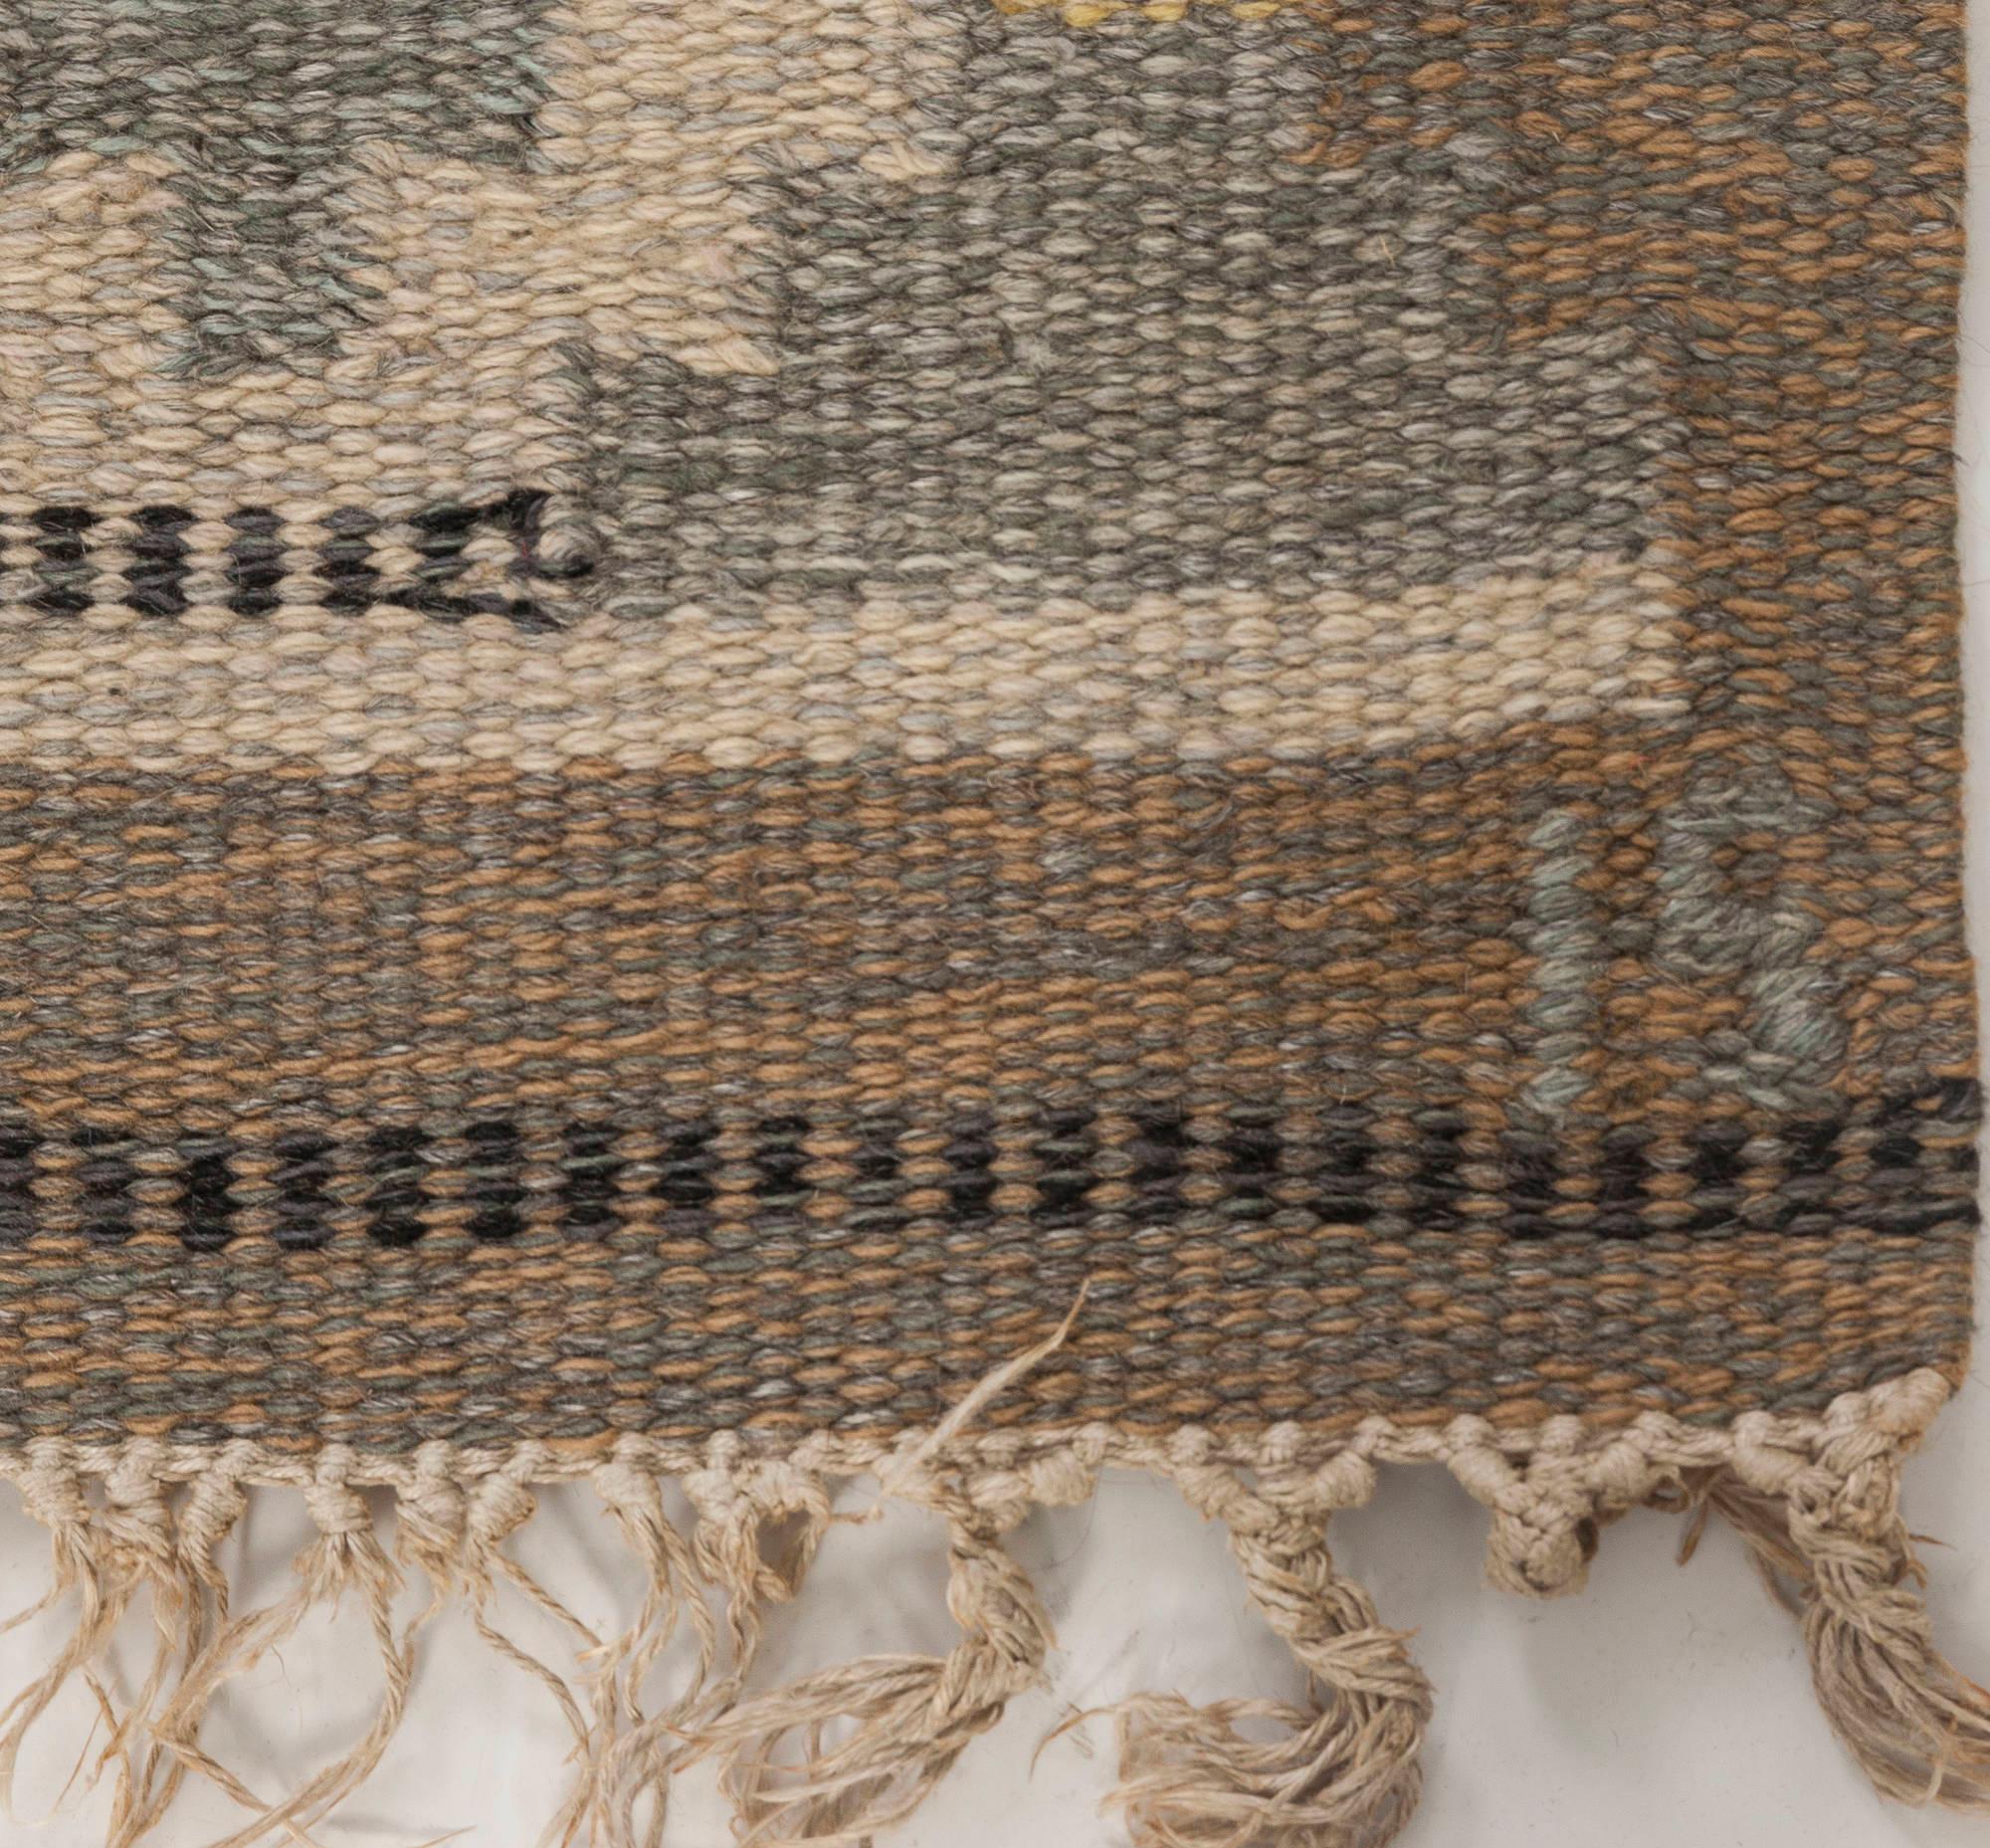 Mid-20th century Swedish wool rug in neutral colors by Ingegerd Silow. Woven signature to edge 'IS'
Size: 4'4